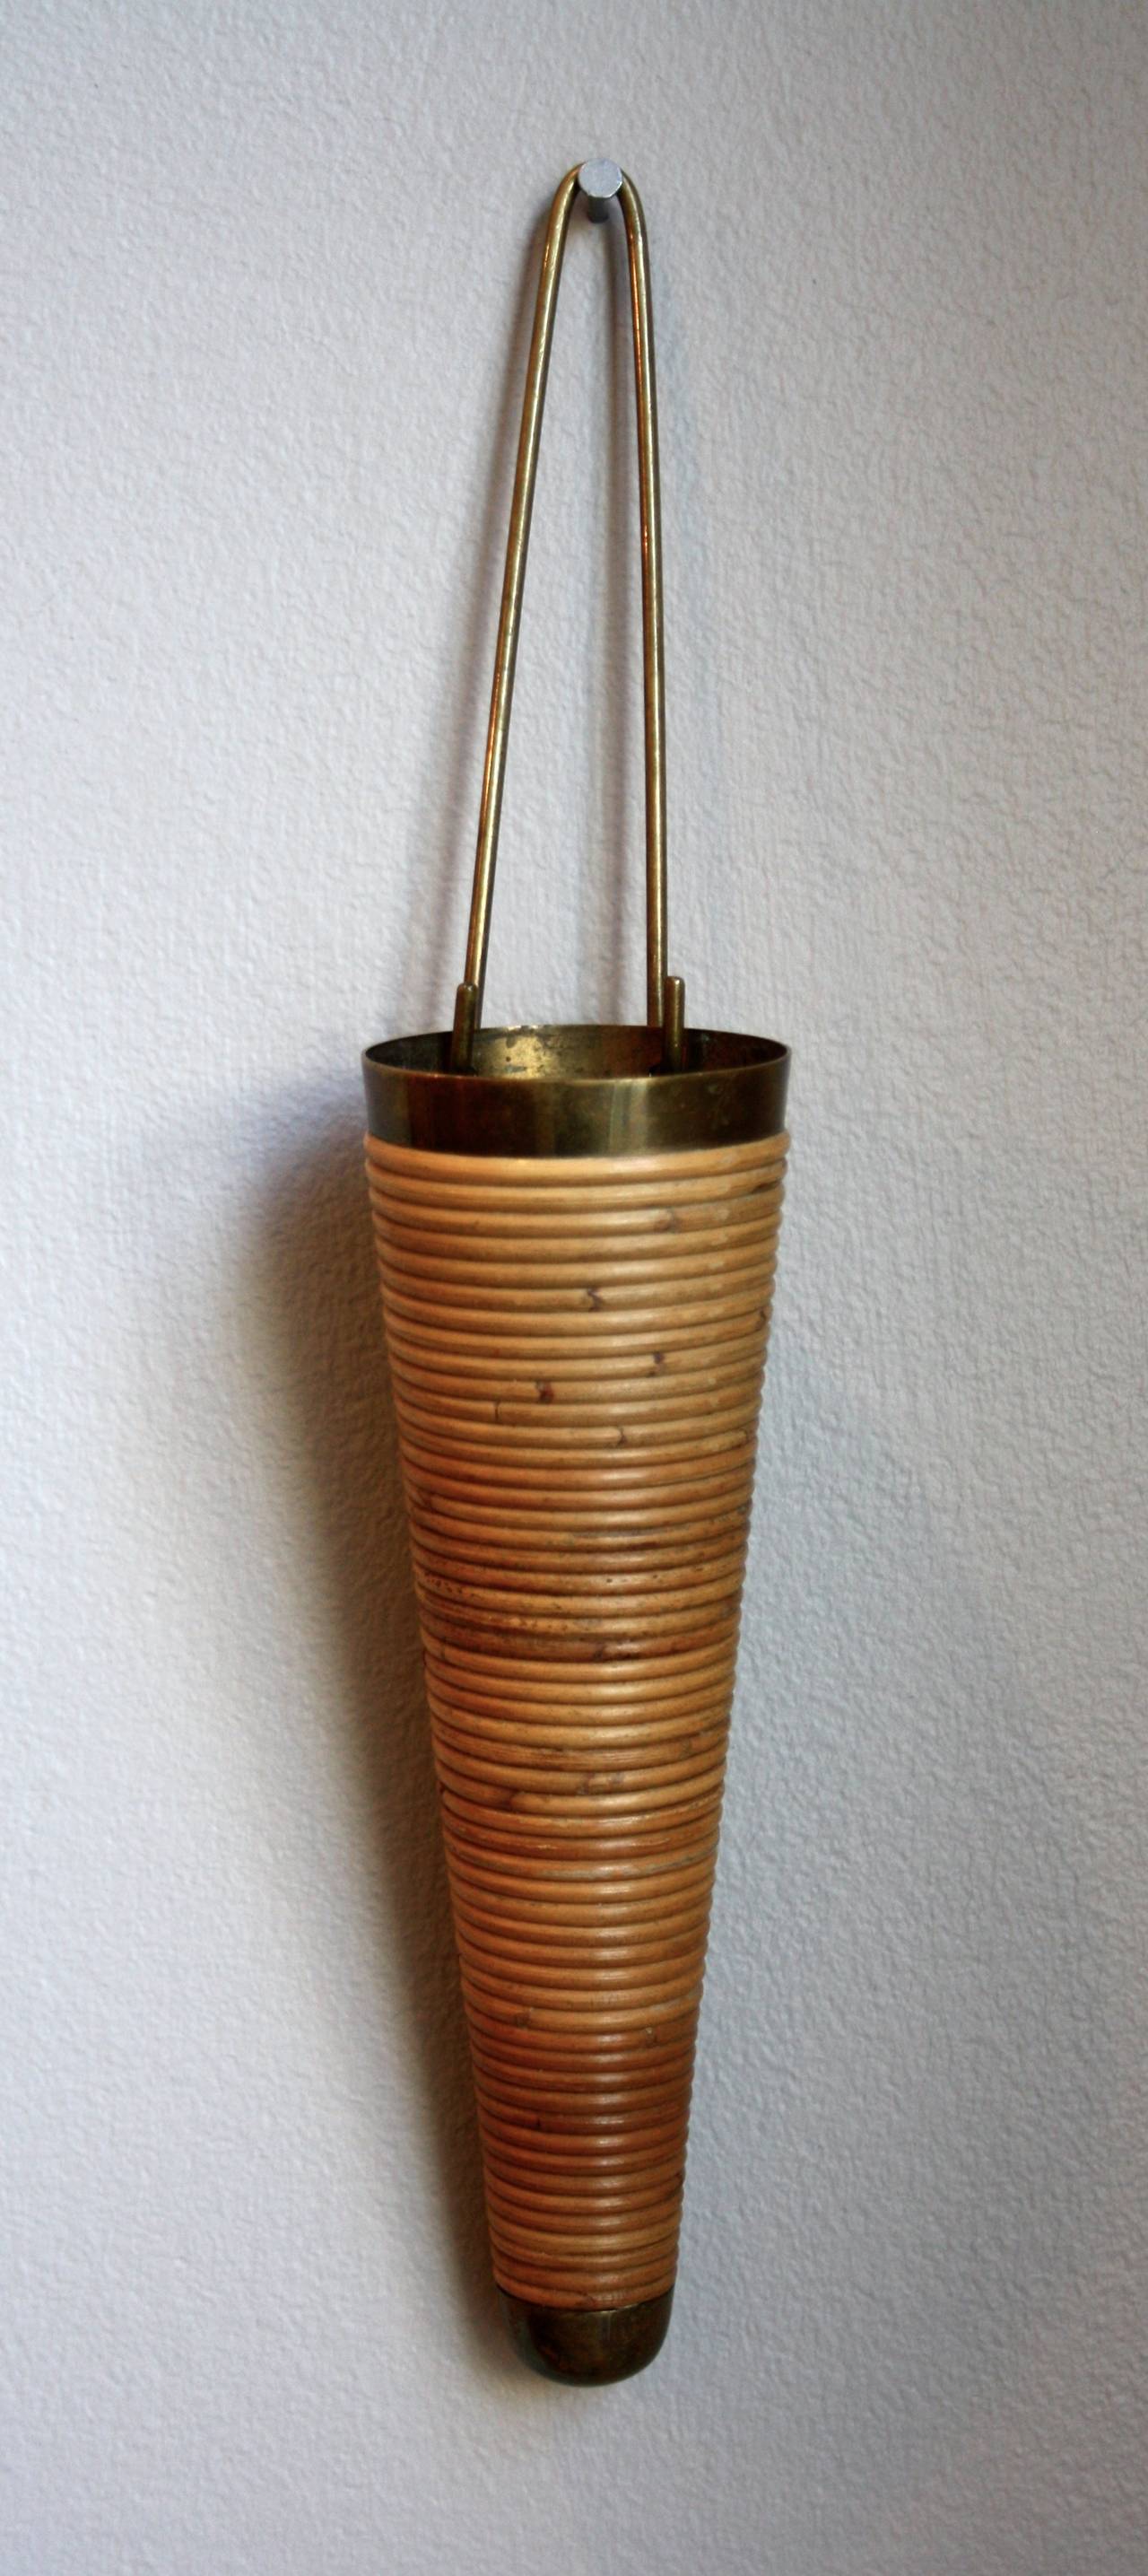 Very rare brass and wicker piece by Carl Auböck. Beautiful wall-mounted vase in great condition with the original wicker intact.